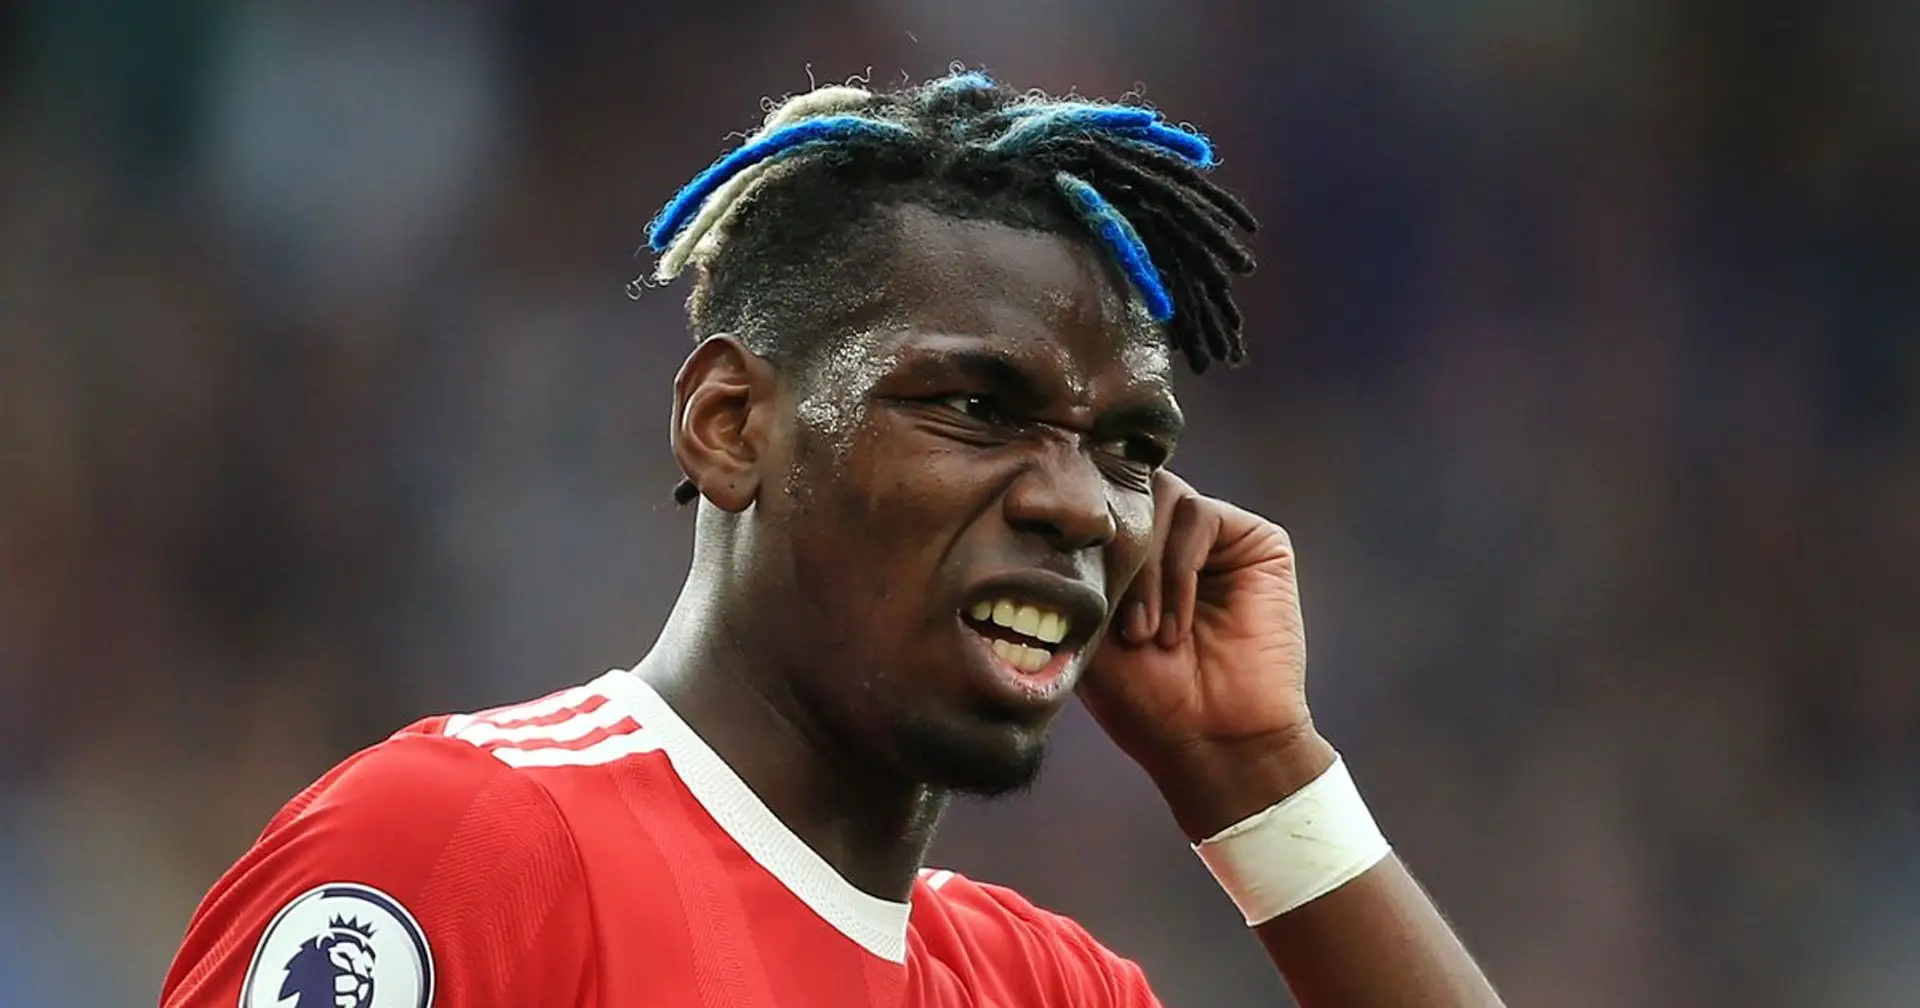 RMC: Paul Pogba out until 2022 with thigh injury